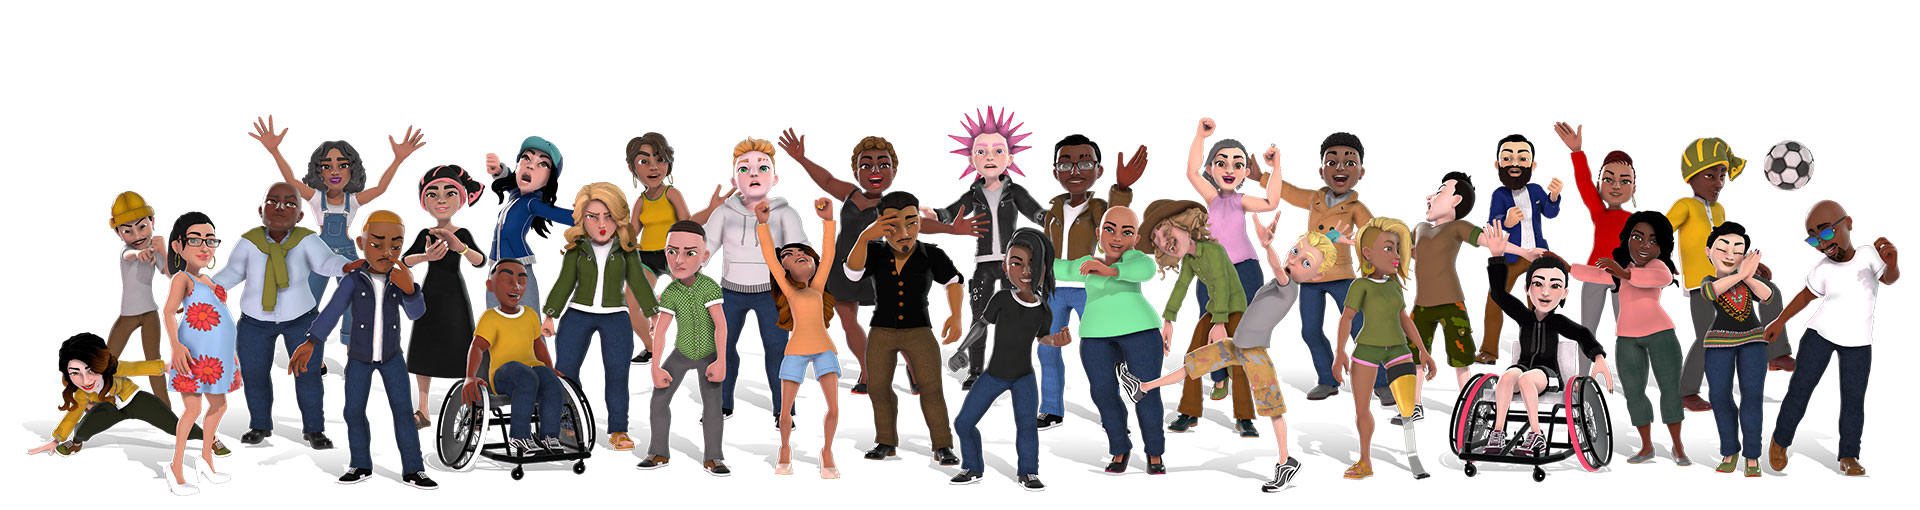 Xbox avatars showing a diverse group of people in different outfits